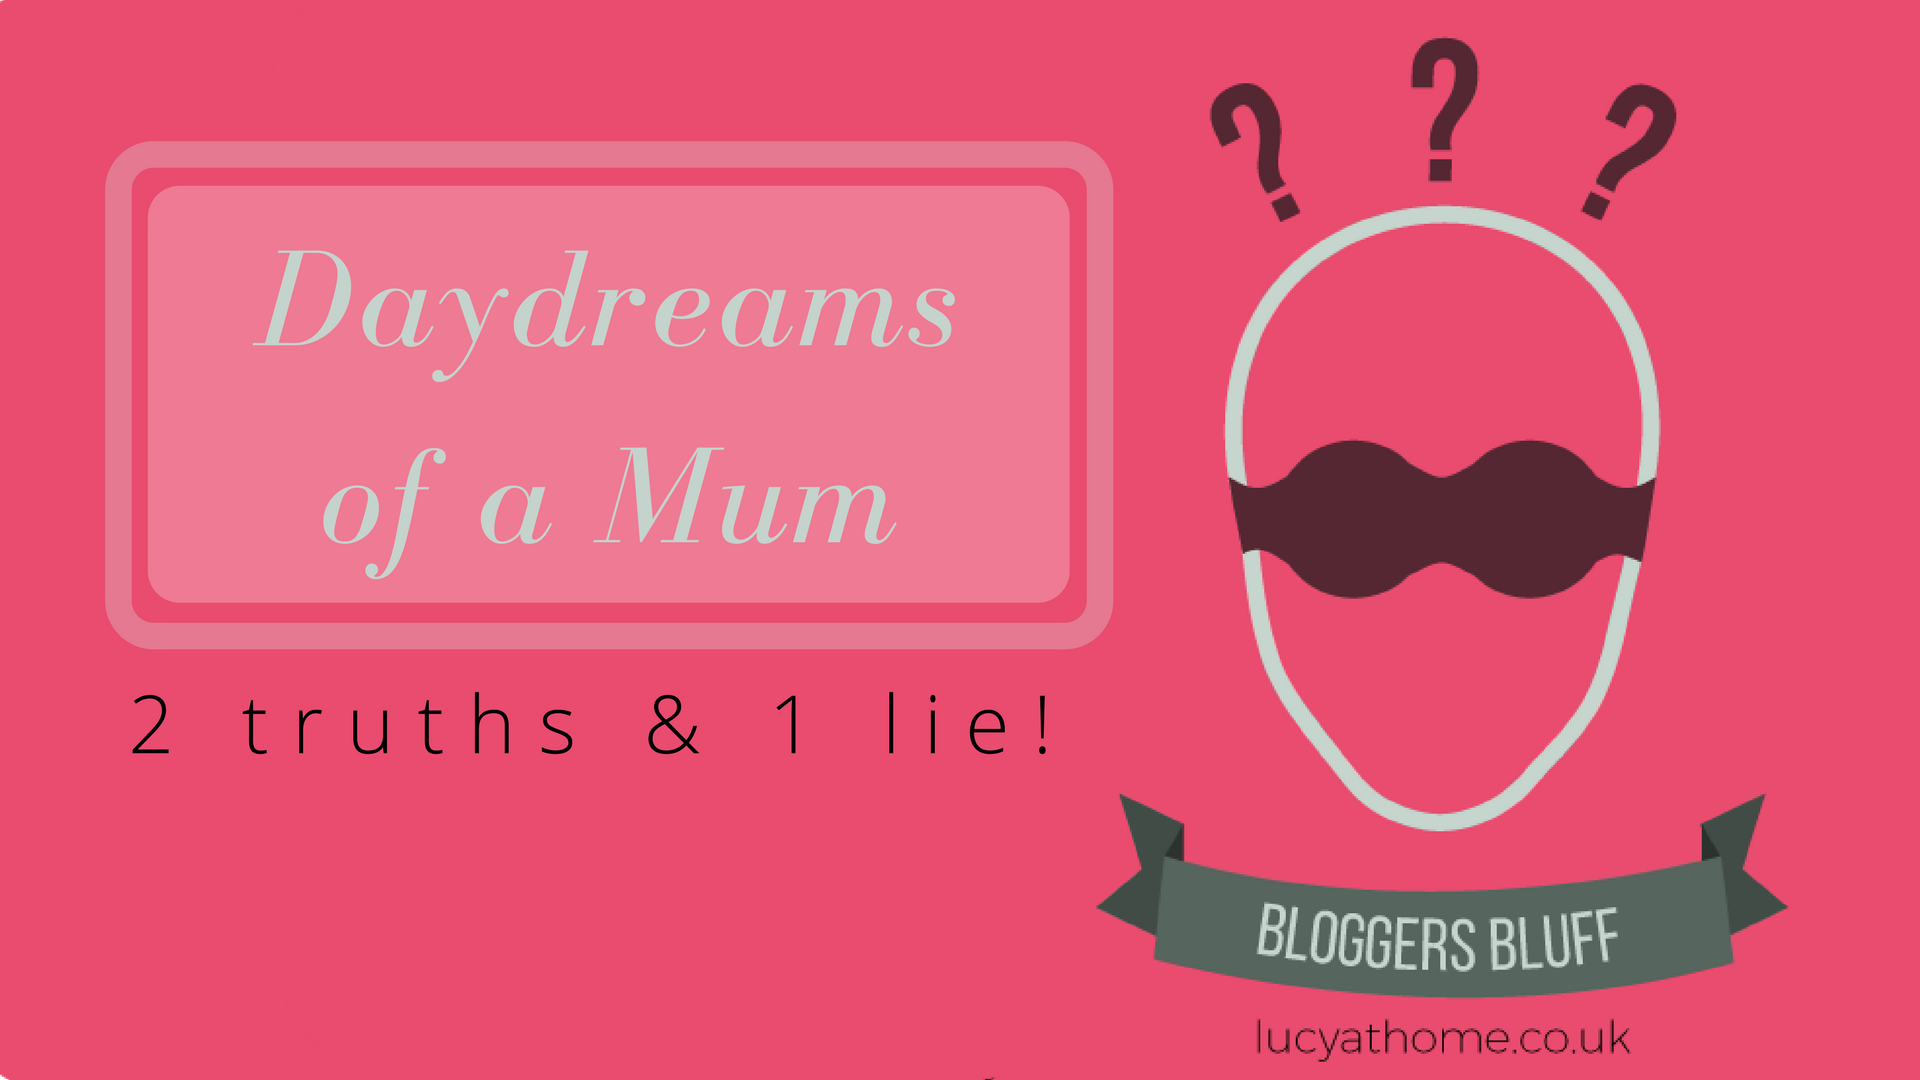 Daydreams of a Mum featured on Lucy At Home's Bloggers Bluff Blogcrush Week 34